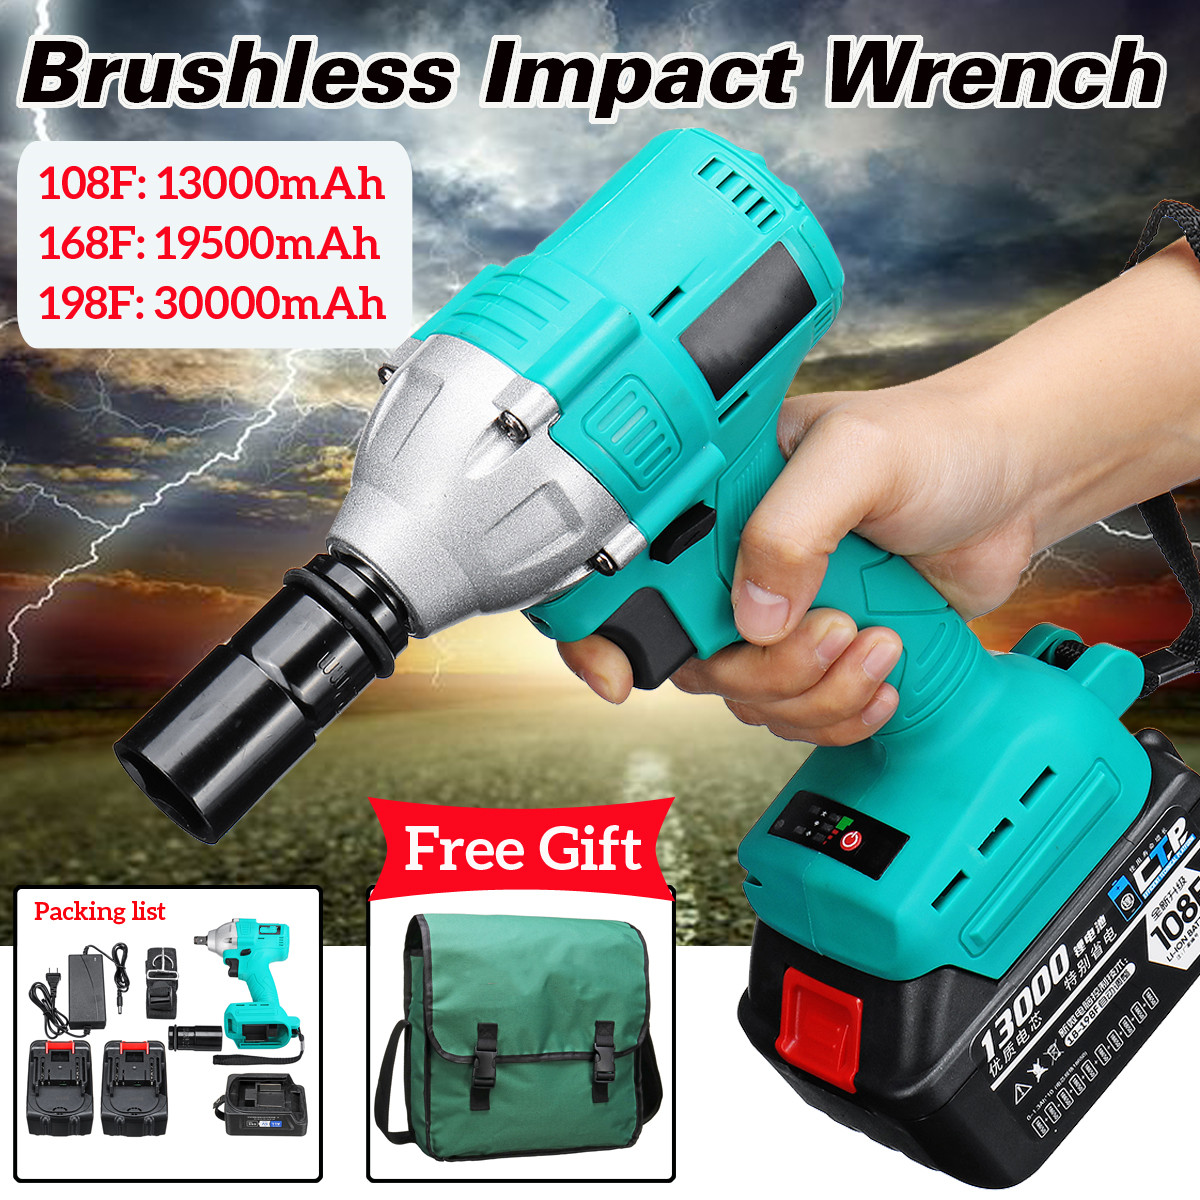 100-240V-Li-ion-Electric-Wrench-Brushless-Impact-Wrench-Wood-Work-Power-Tool-with-2-Battery-1391023-2